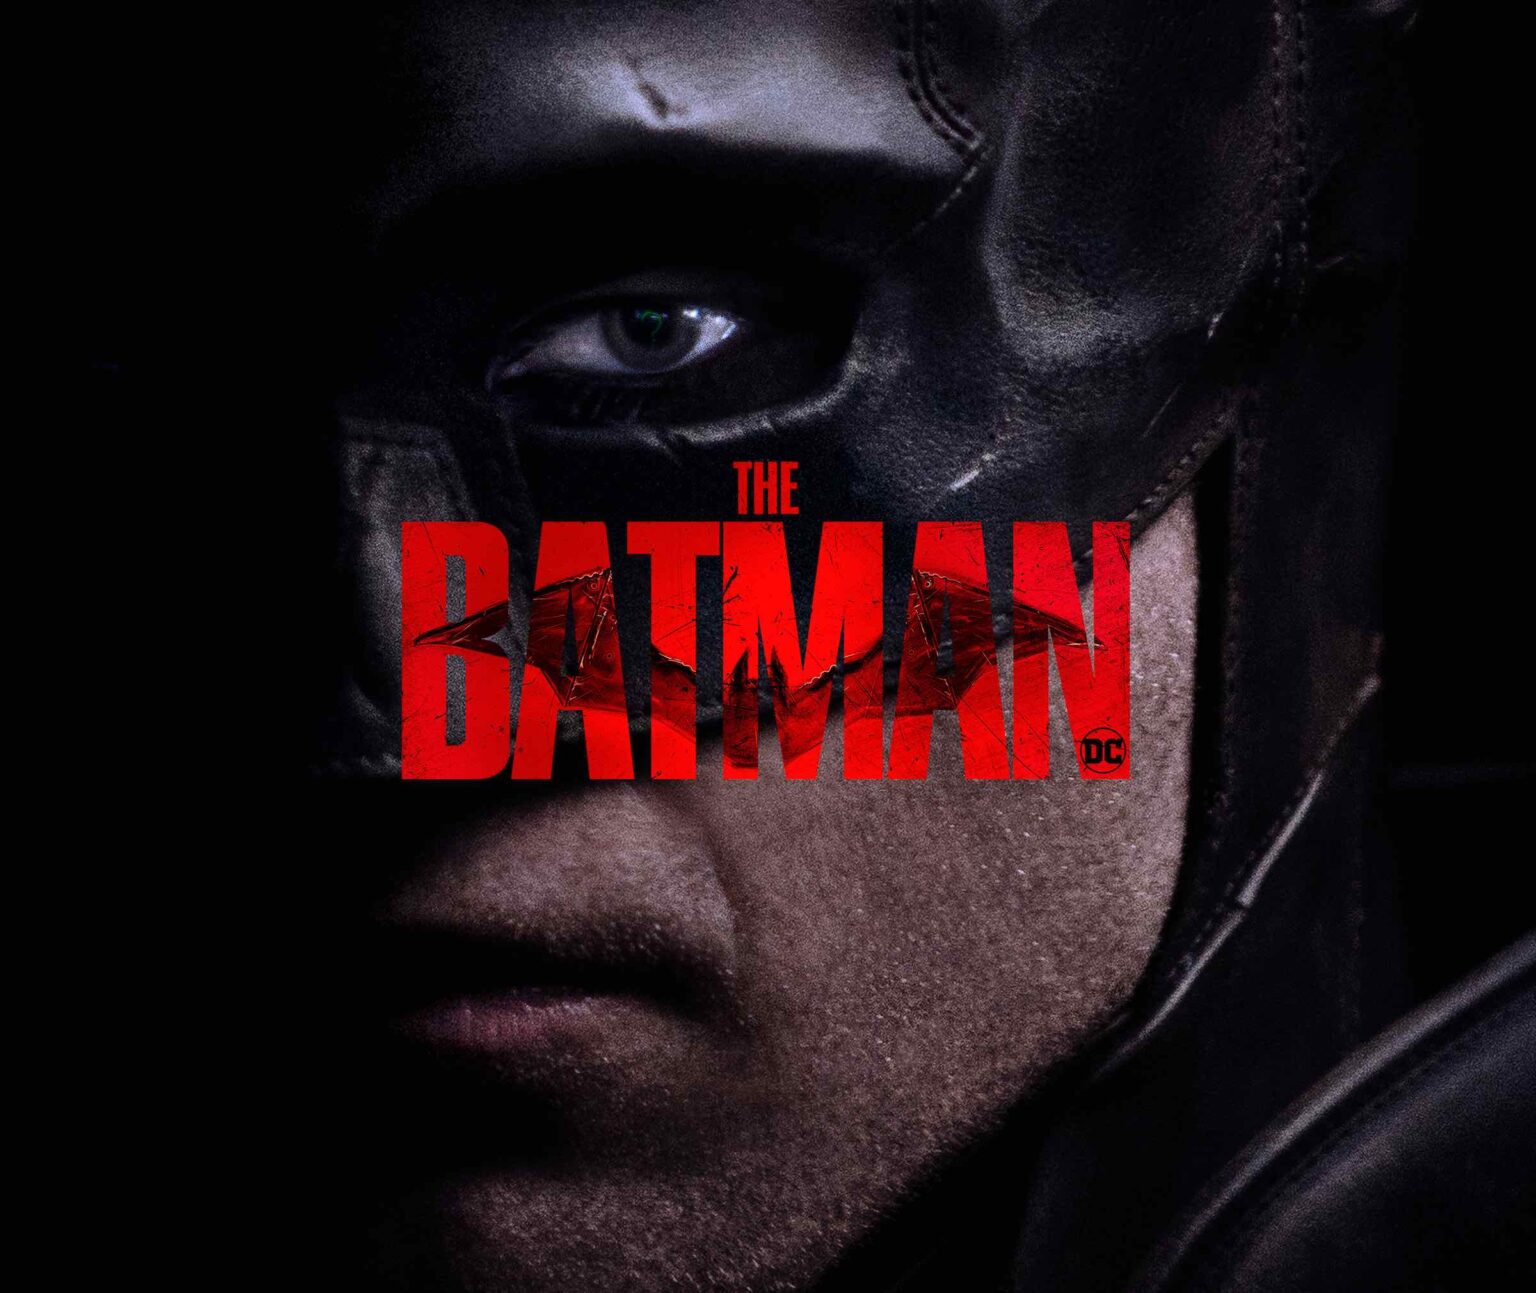 Robert Pattinson has taken a new spin on Batman, portraying the superhero in a way that has never been done before. But where can 'The Batman' be streamed?